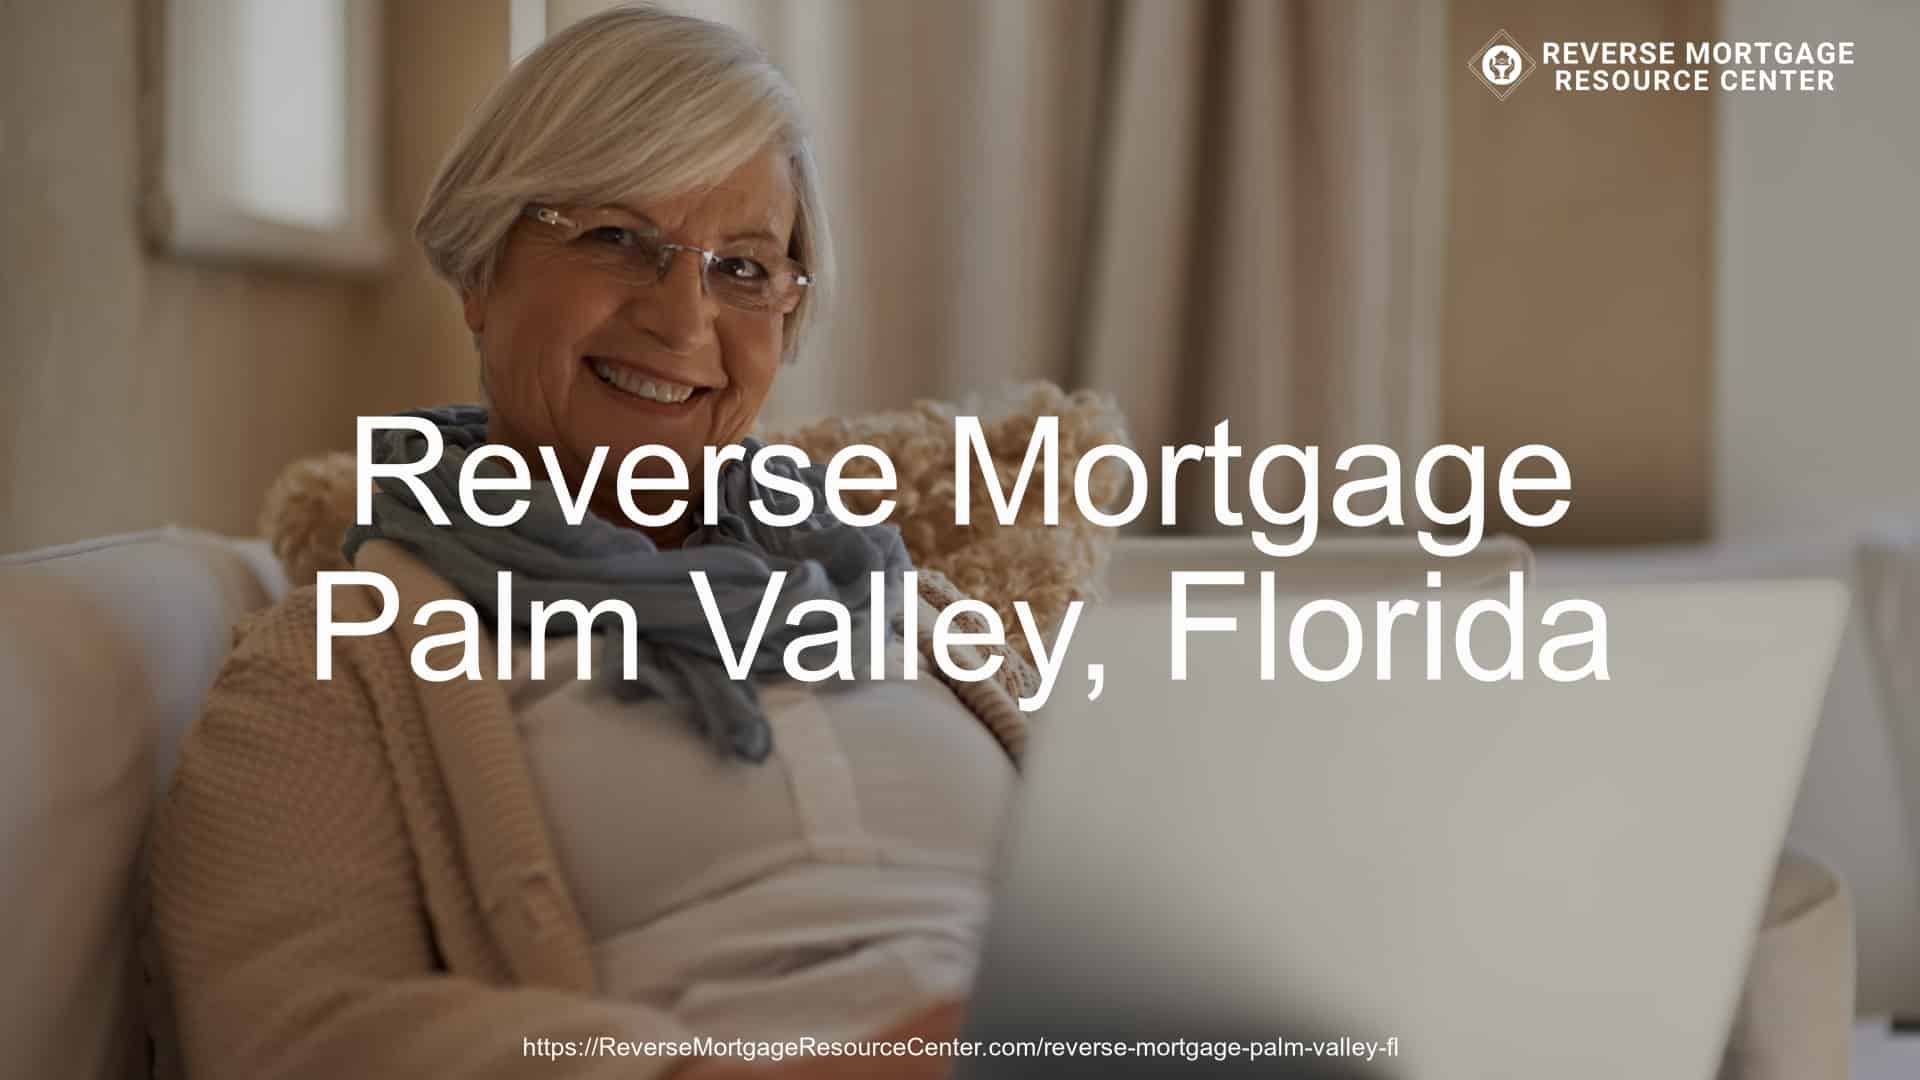 Reverse Mortgage Loans in Palm Valley Florida